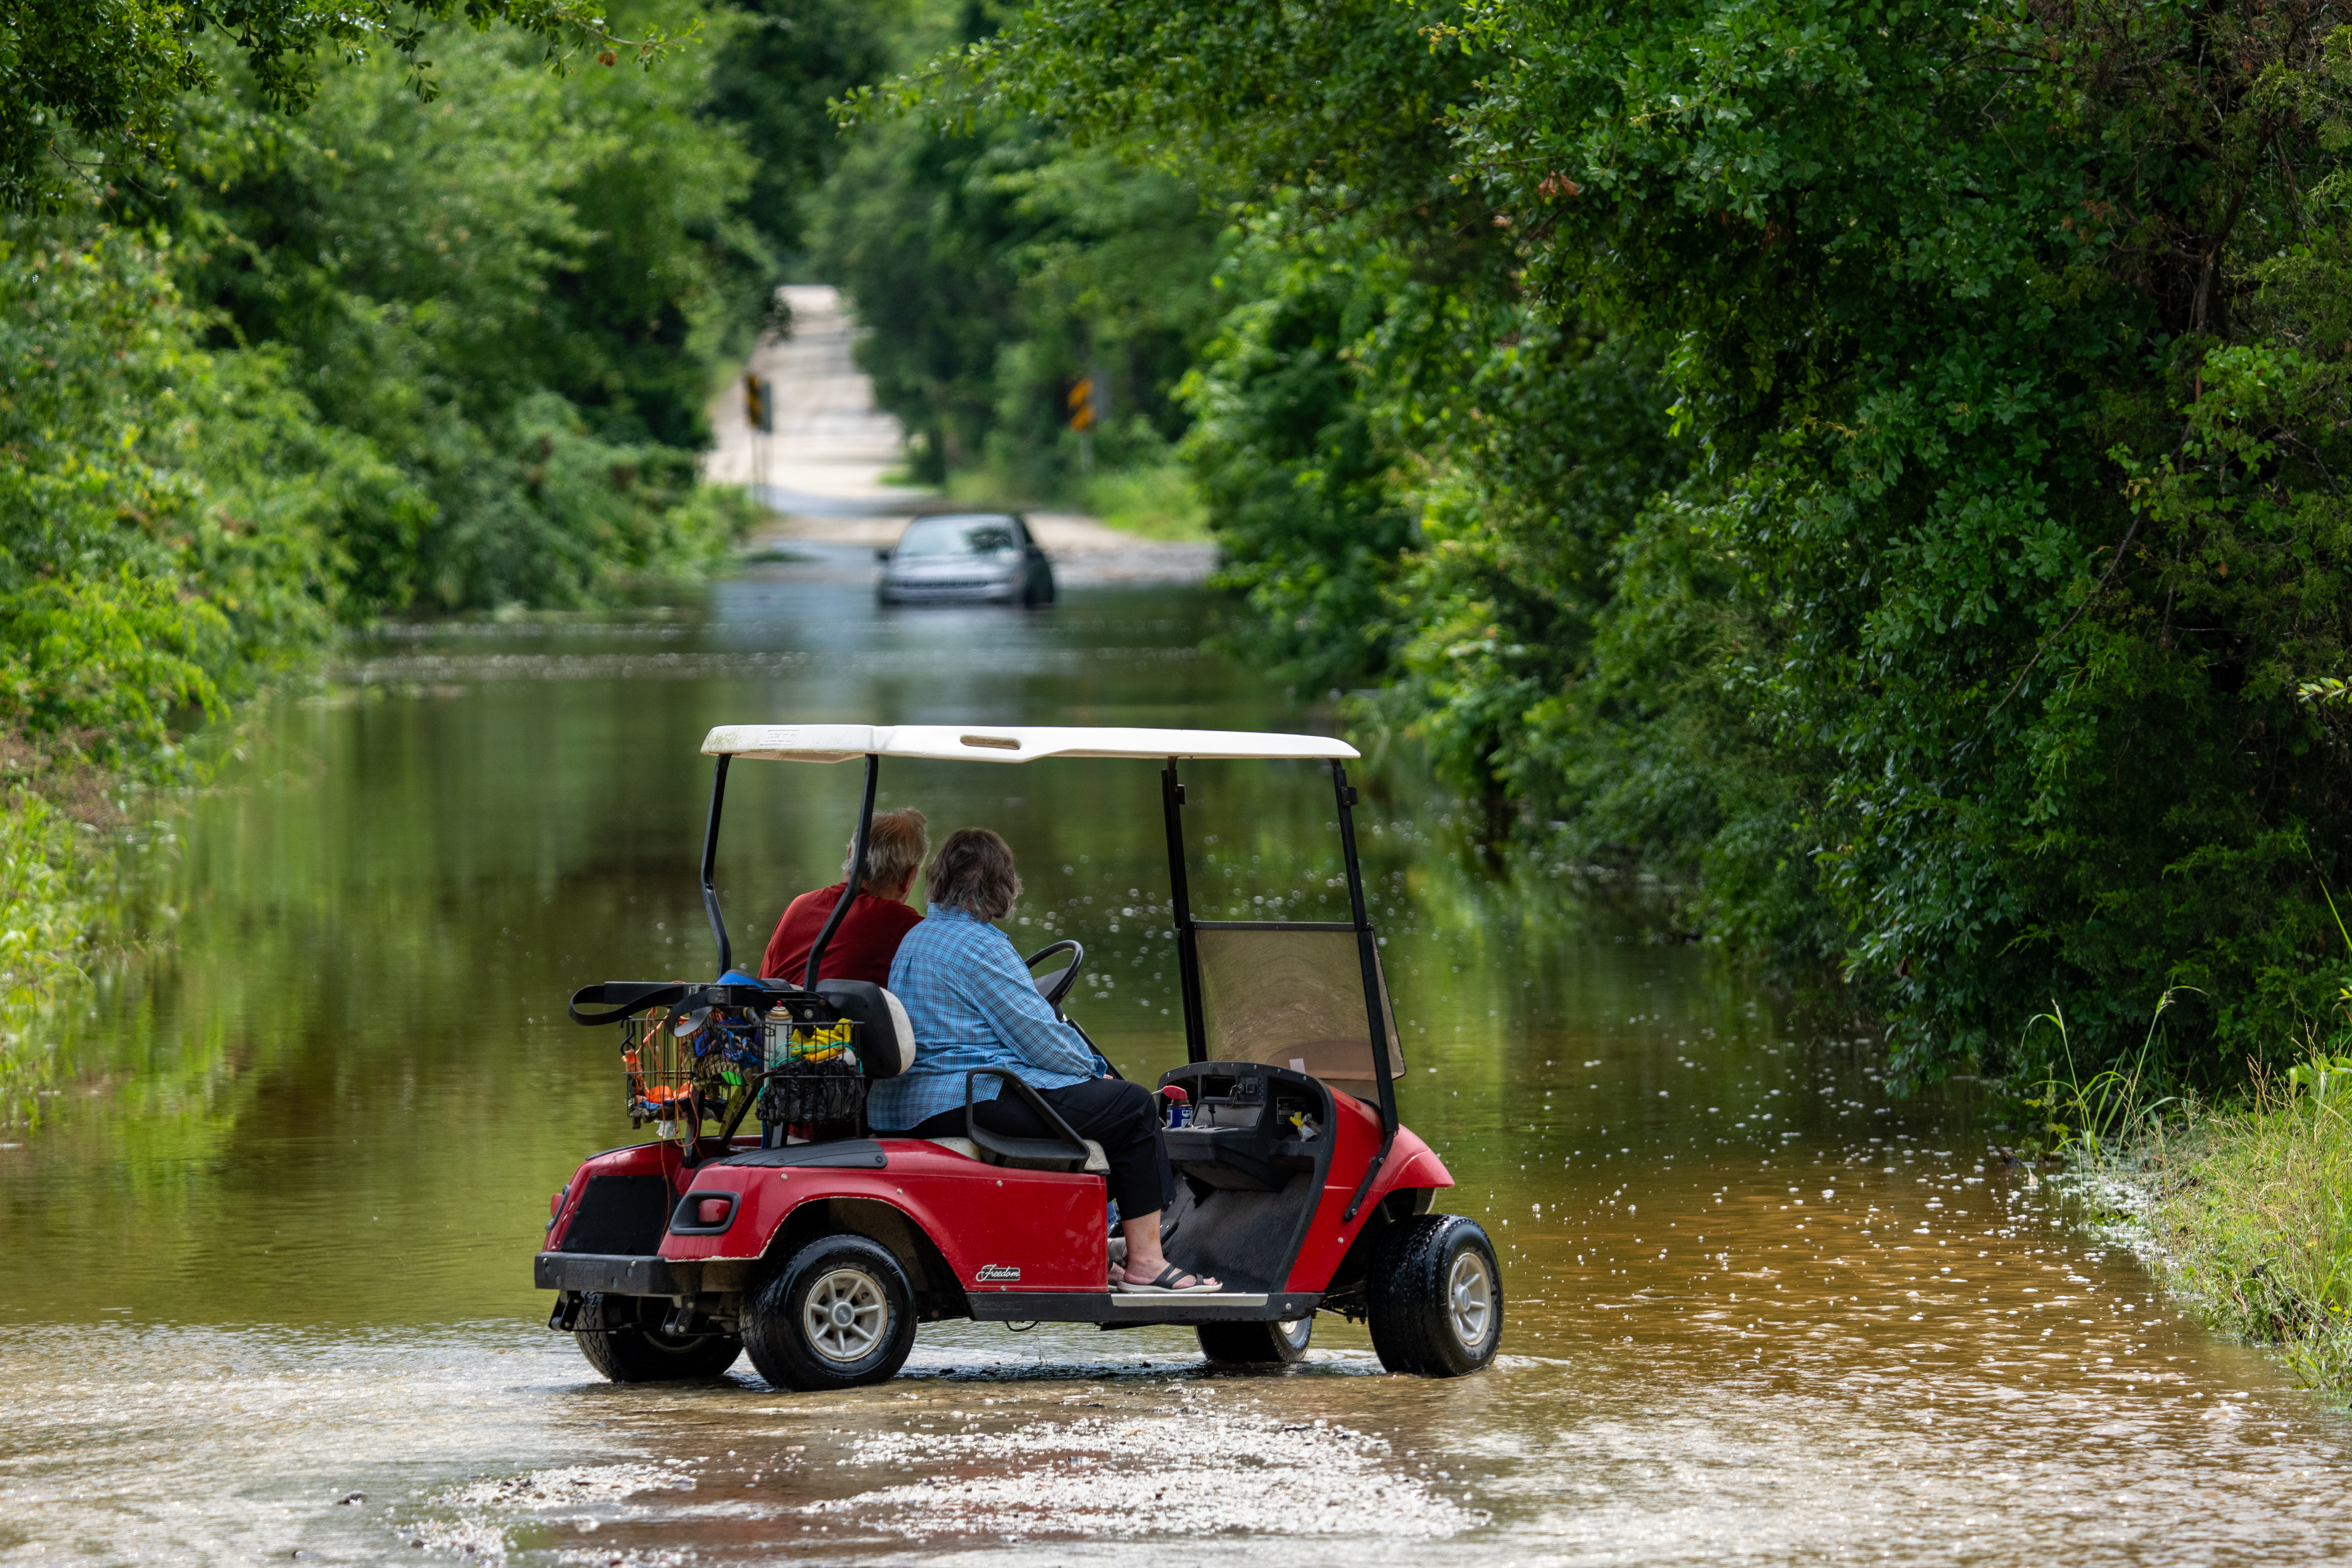 Car in flooded waters as people on golf cart look on.